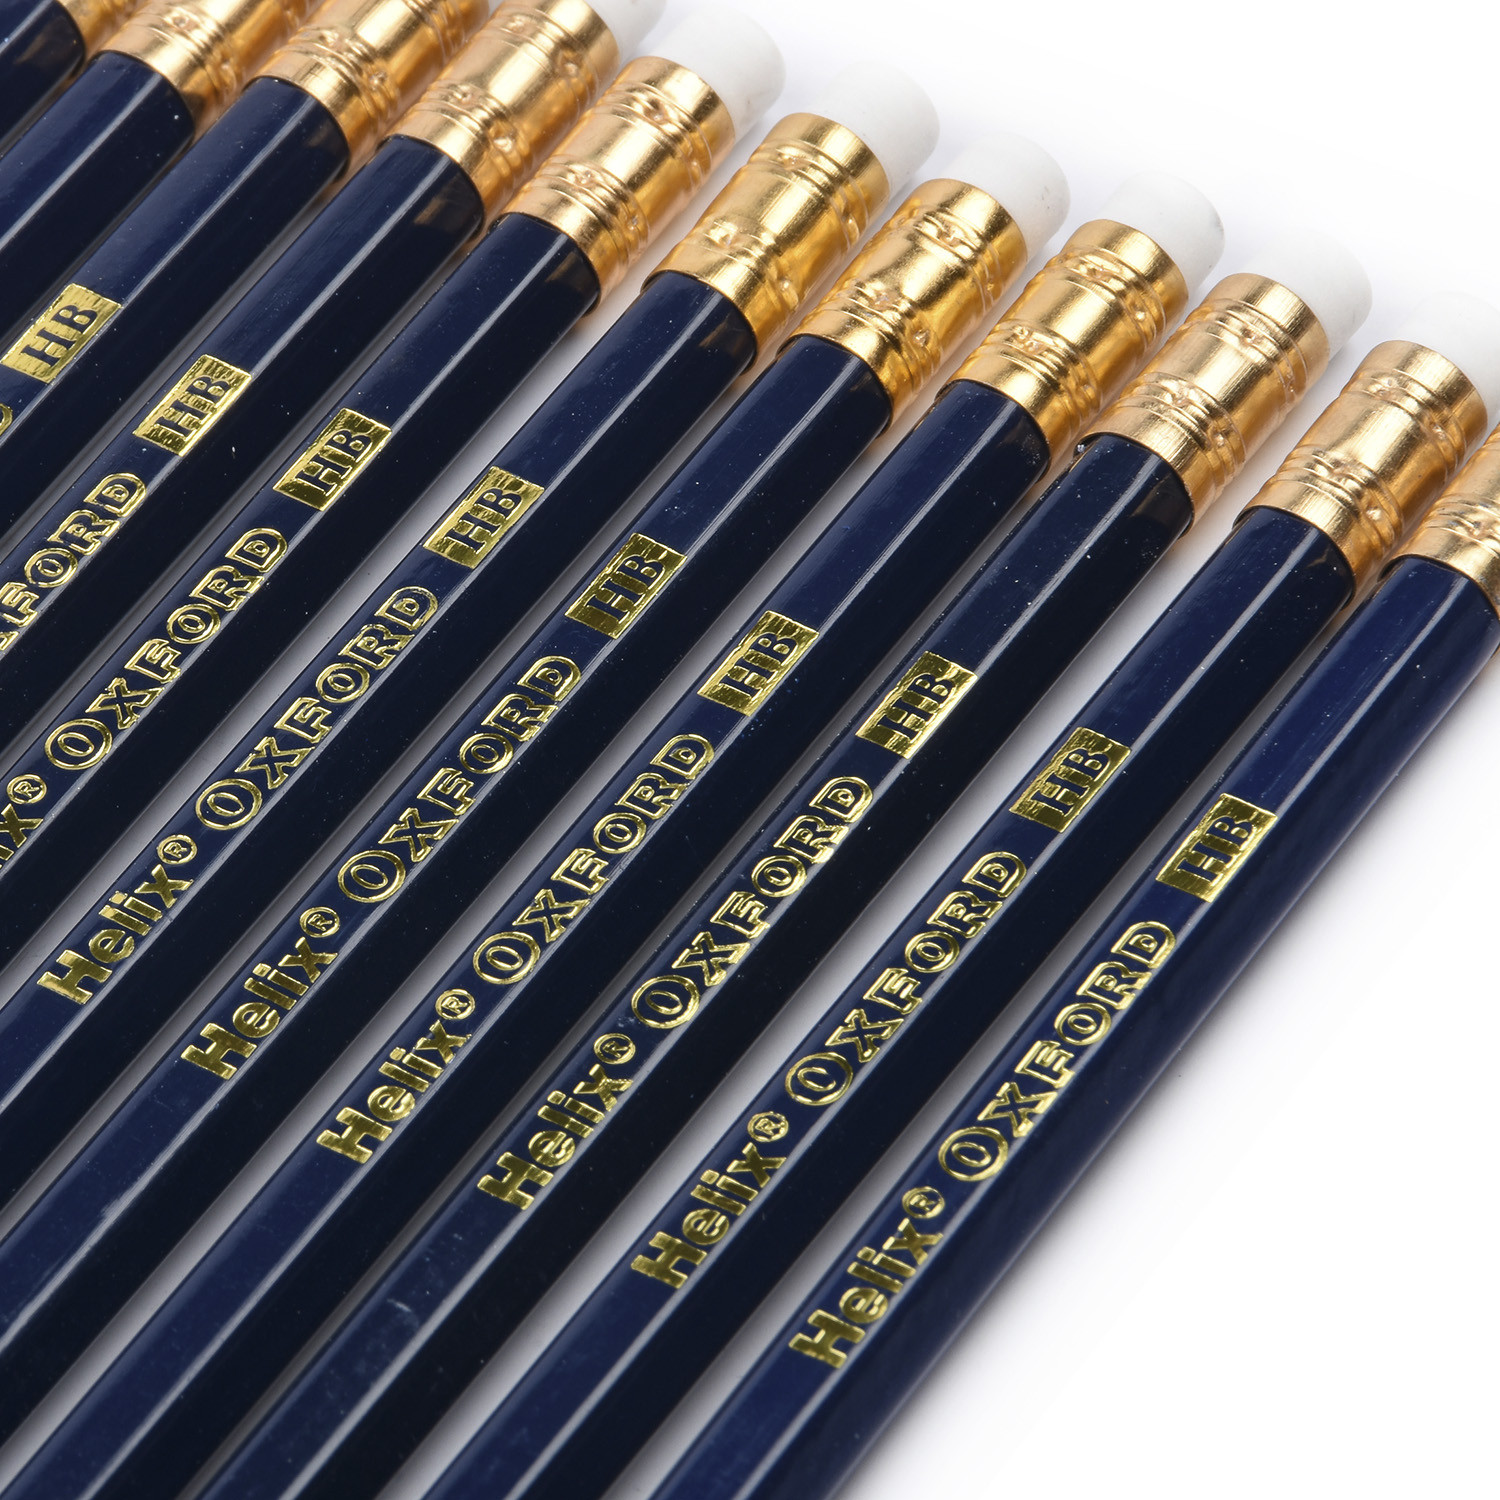 Pack of 12 Helix Oxford Eraser Tipped HB Pencils Image 3